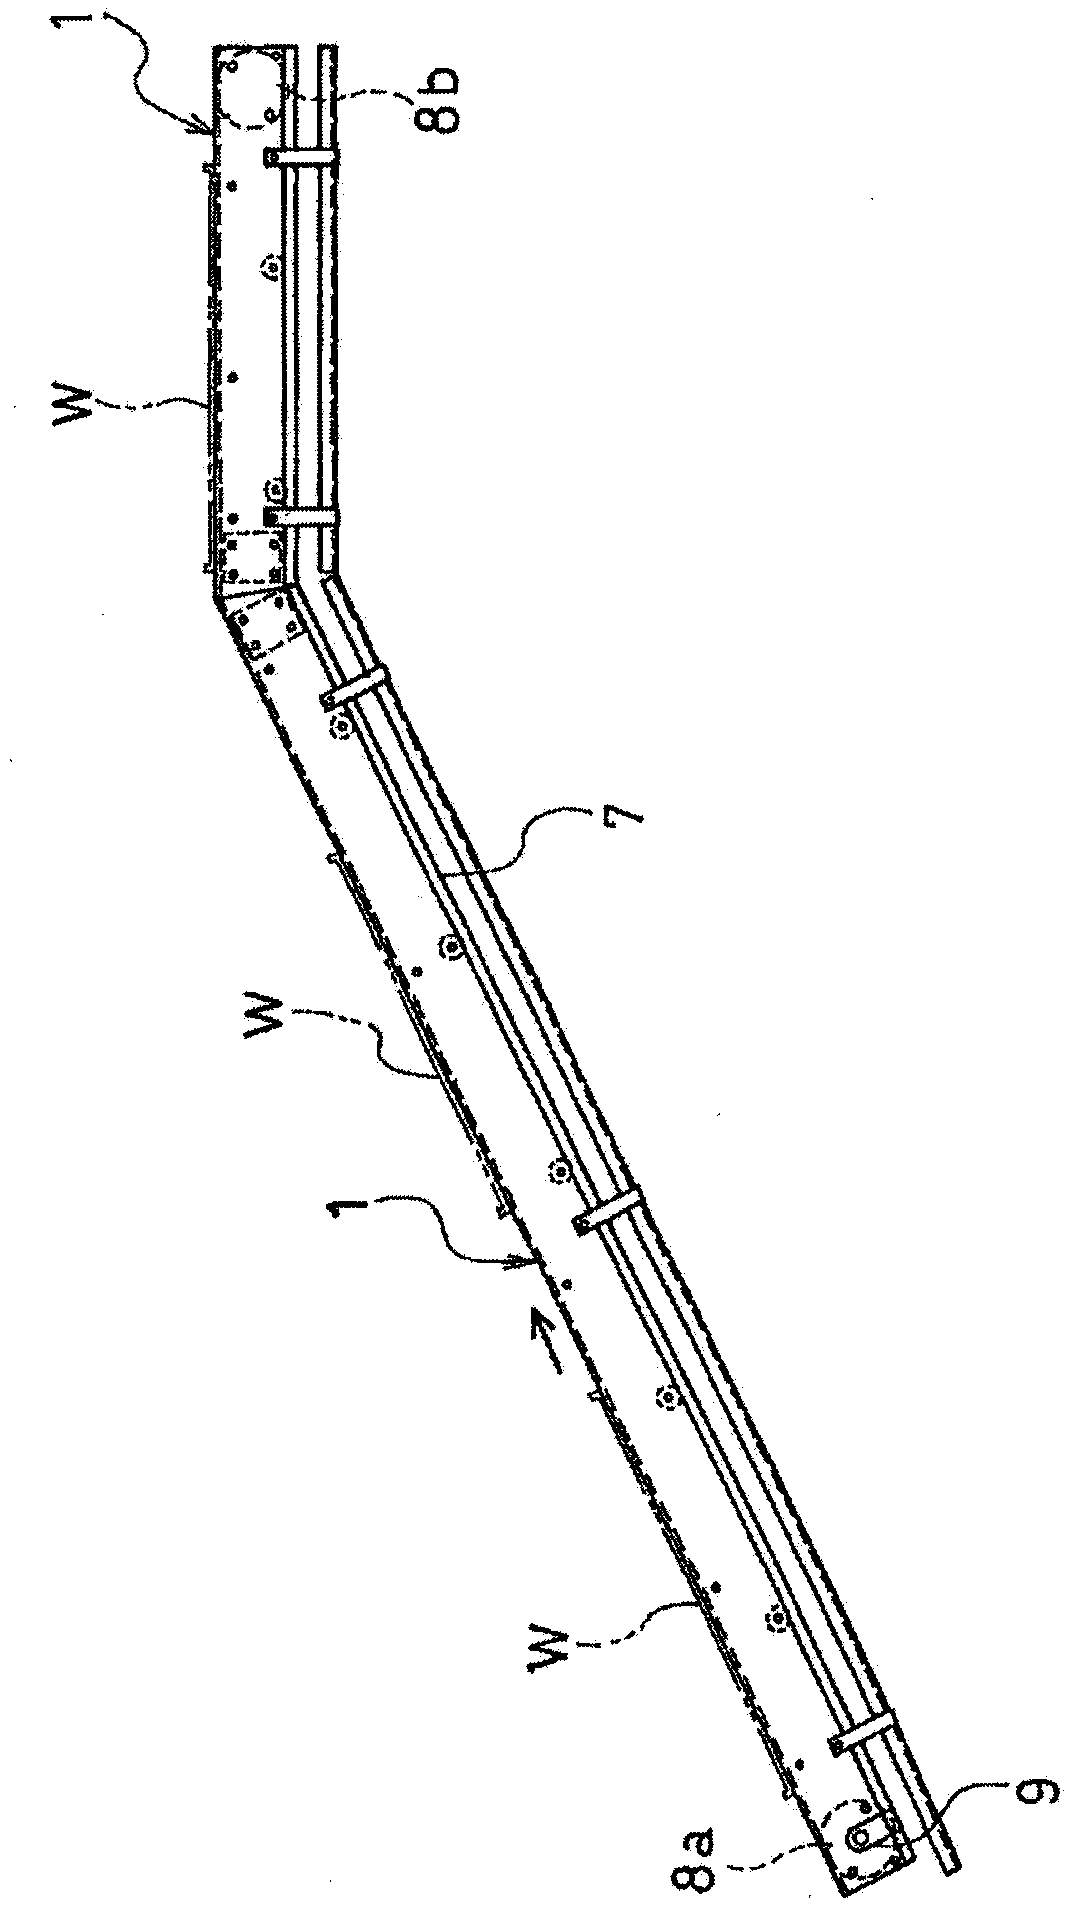 Plastic chain conveyor with magnet connecting pins